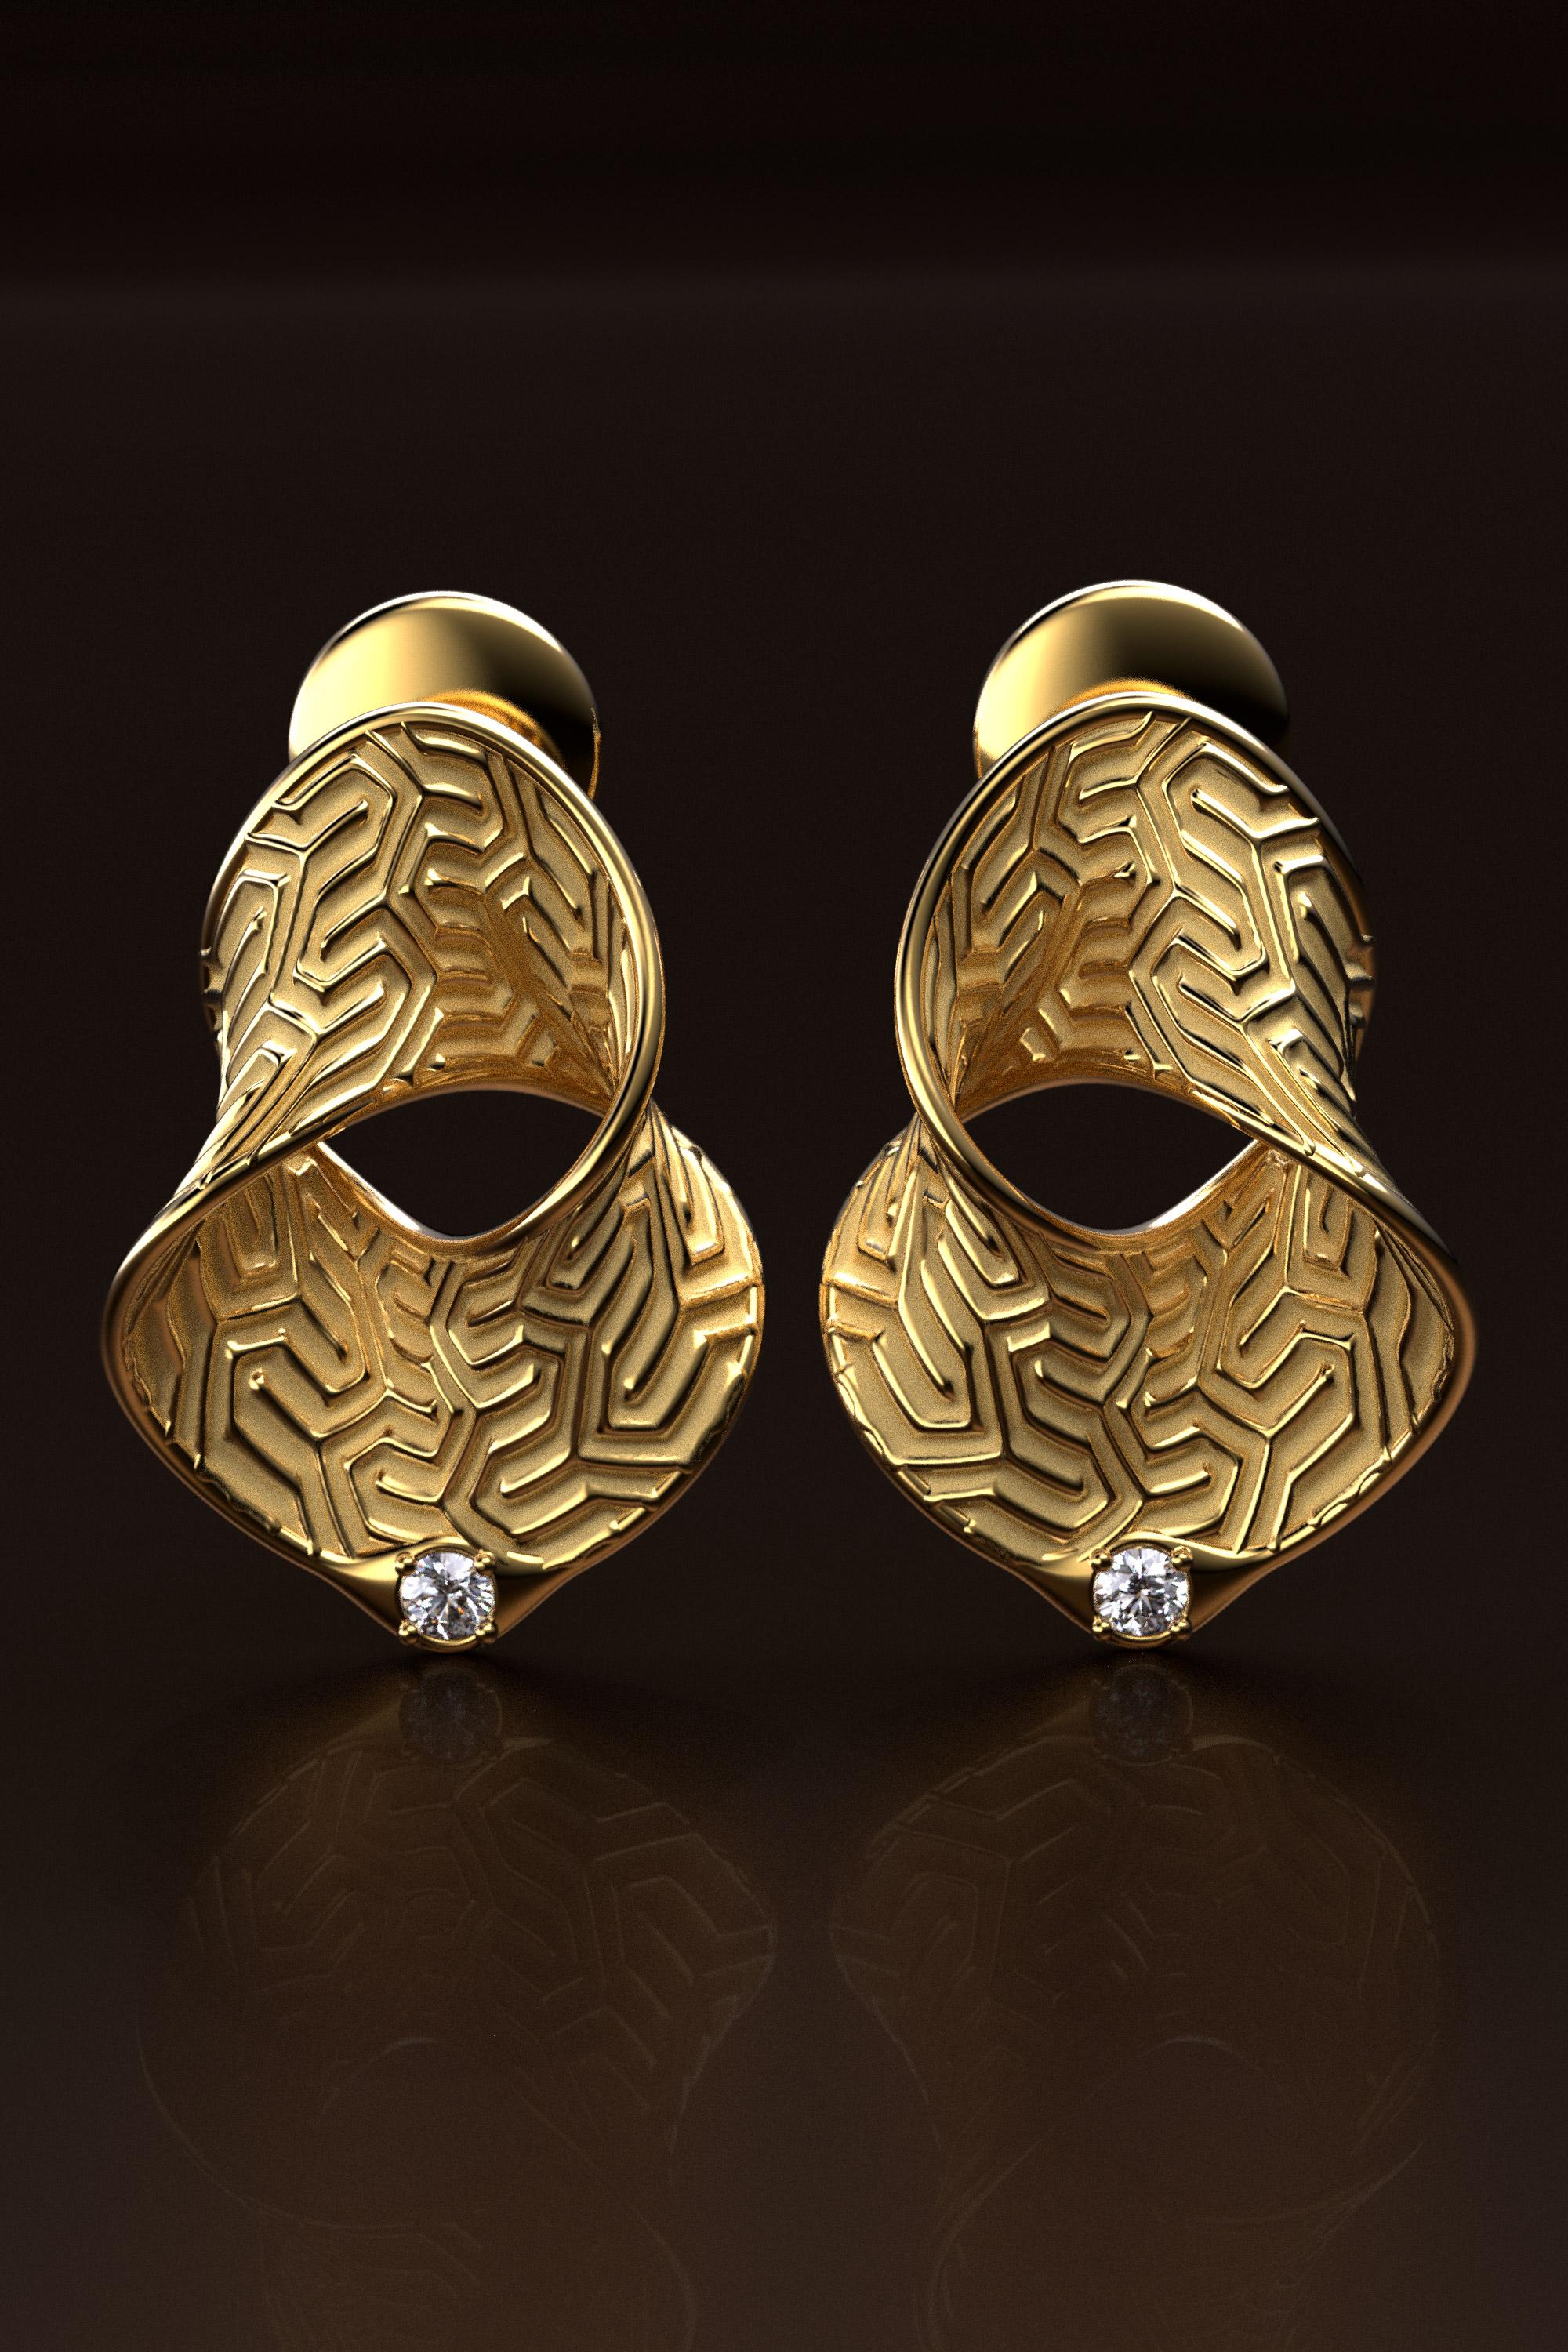 Made to order 14k Gold Earrings.
Modern and symmetrical statement Gold Earrings with natural diamonds.
The jewels of the Polvere collection are born from a material idea in which modern and fluid surfaces are covered with gold dust, play with the